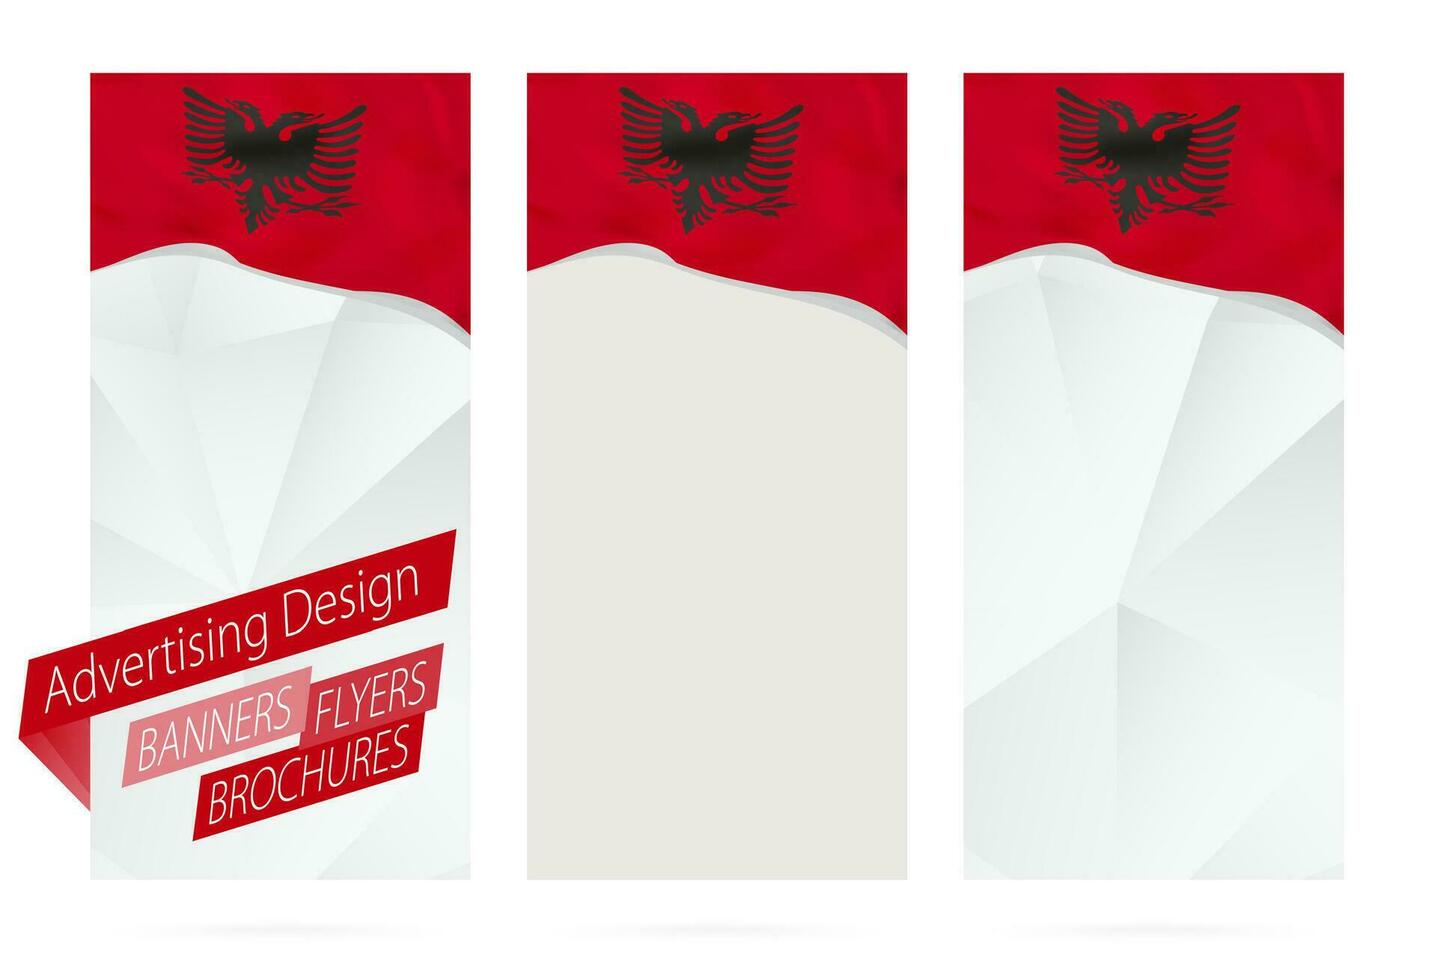 Design of banners, flyers, brochures with flag of Albania. vector